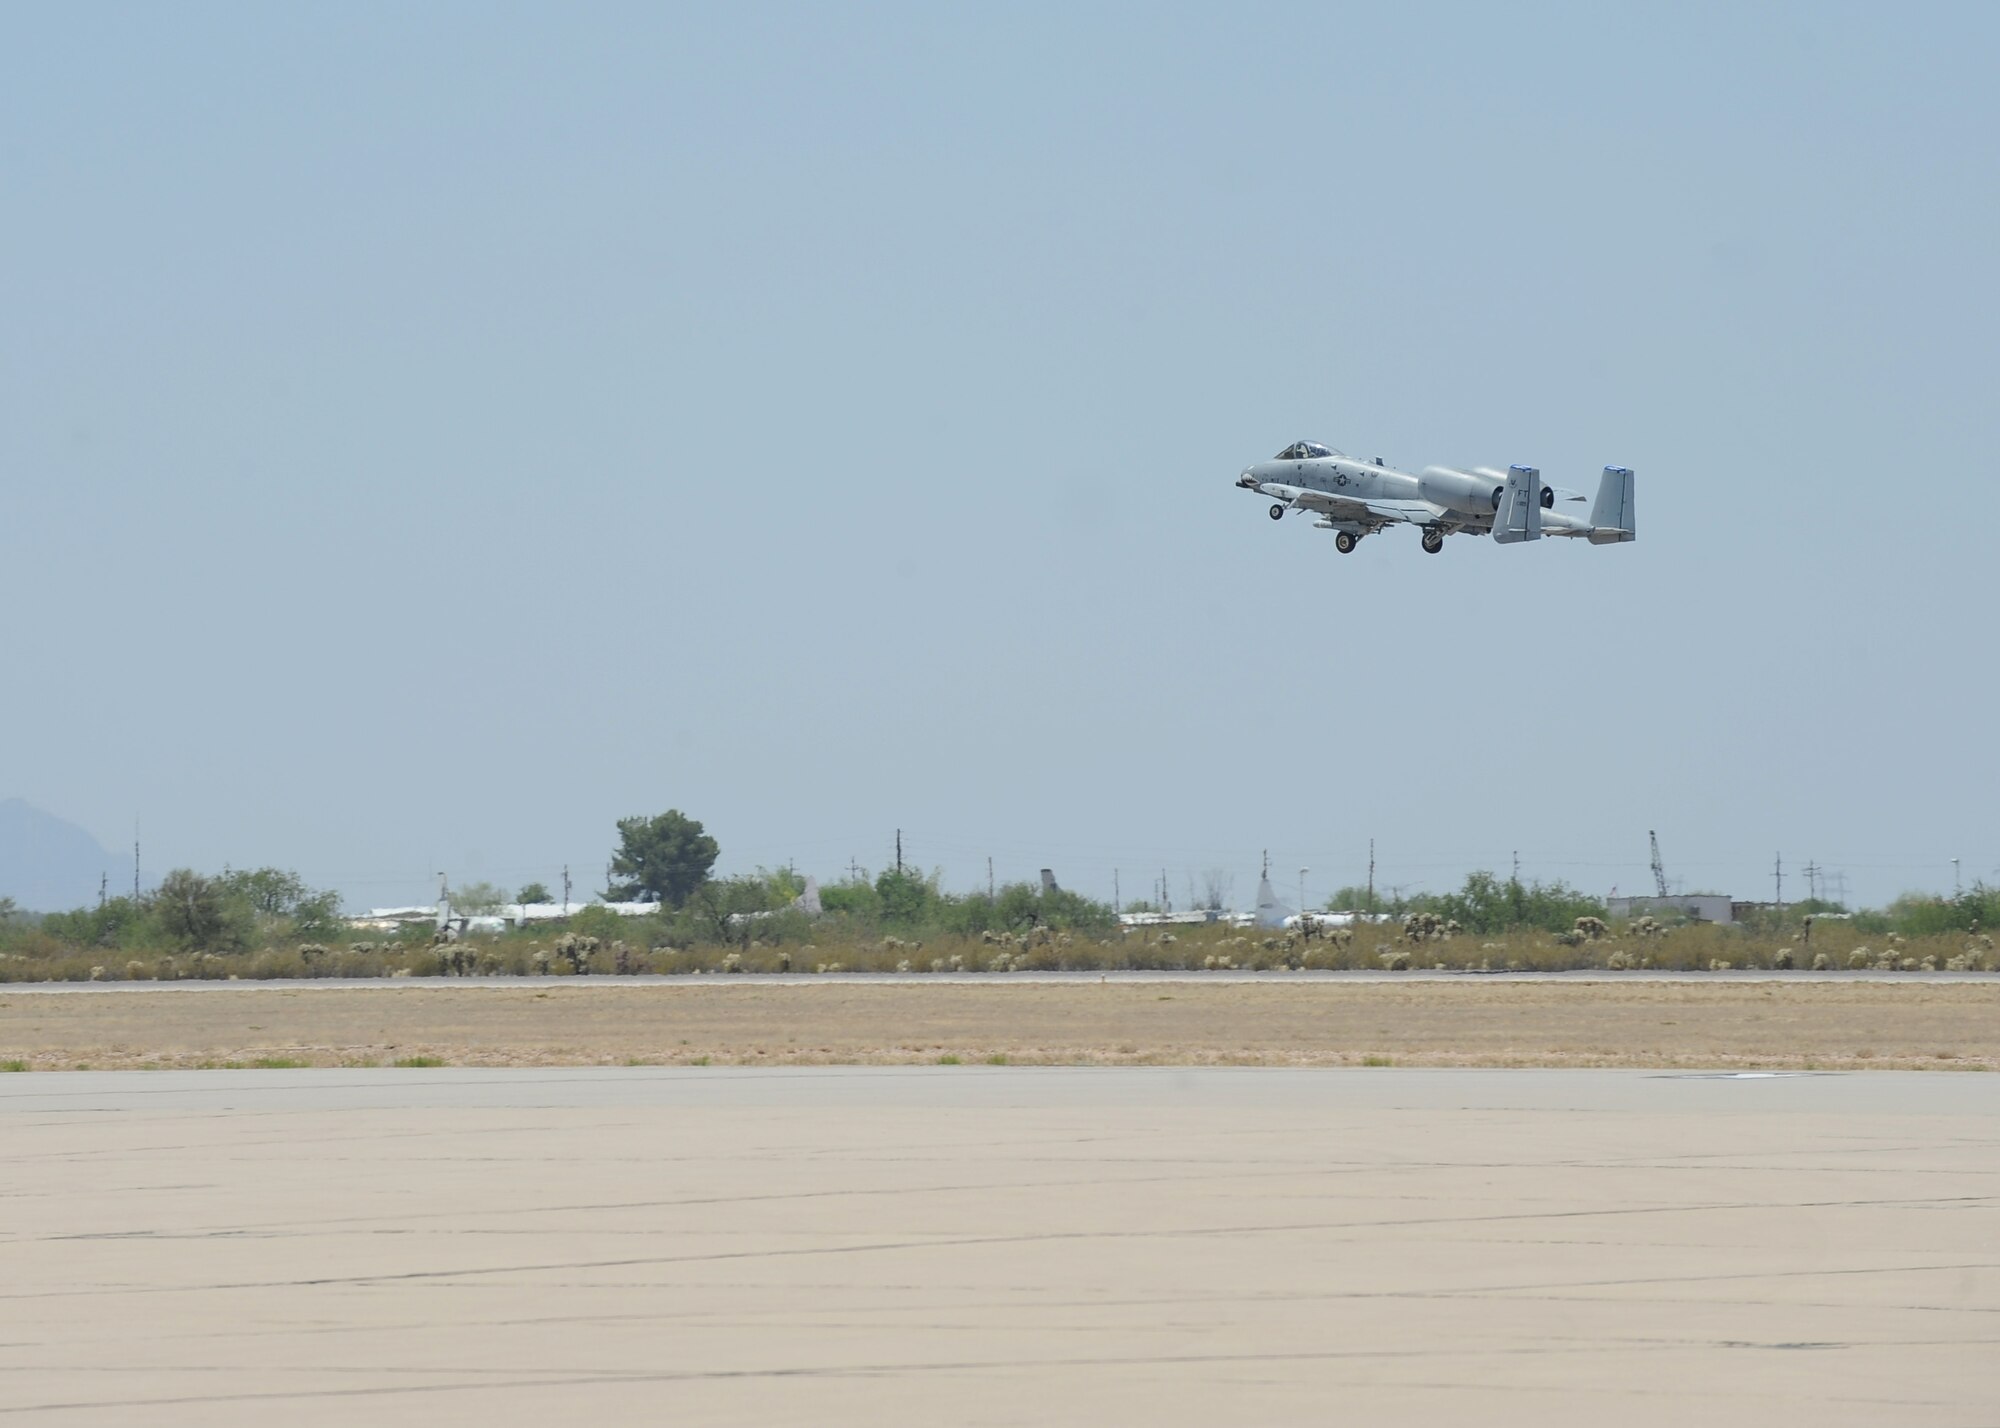 An A-10C Thunderbolt II from the 23rd Fighter Group, Moody Air Force Base, Ga., retracts its landing gear after taking off from Davis-Monthan Air Force Base, Ariz., June 2, 2016. D-M hosted the biennial competition which scores strafing accuracy, high-altitude dive-bombing, low-angle high-delivery, Maverick missile precision and team tactics. (U.S. Air Force photo by Airman 1st Class Ashley N. Steffen/Released)